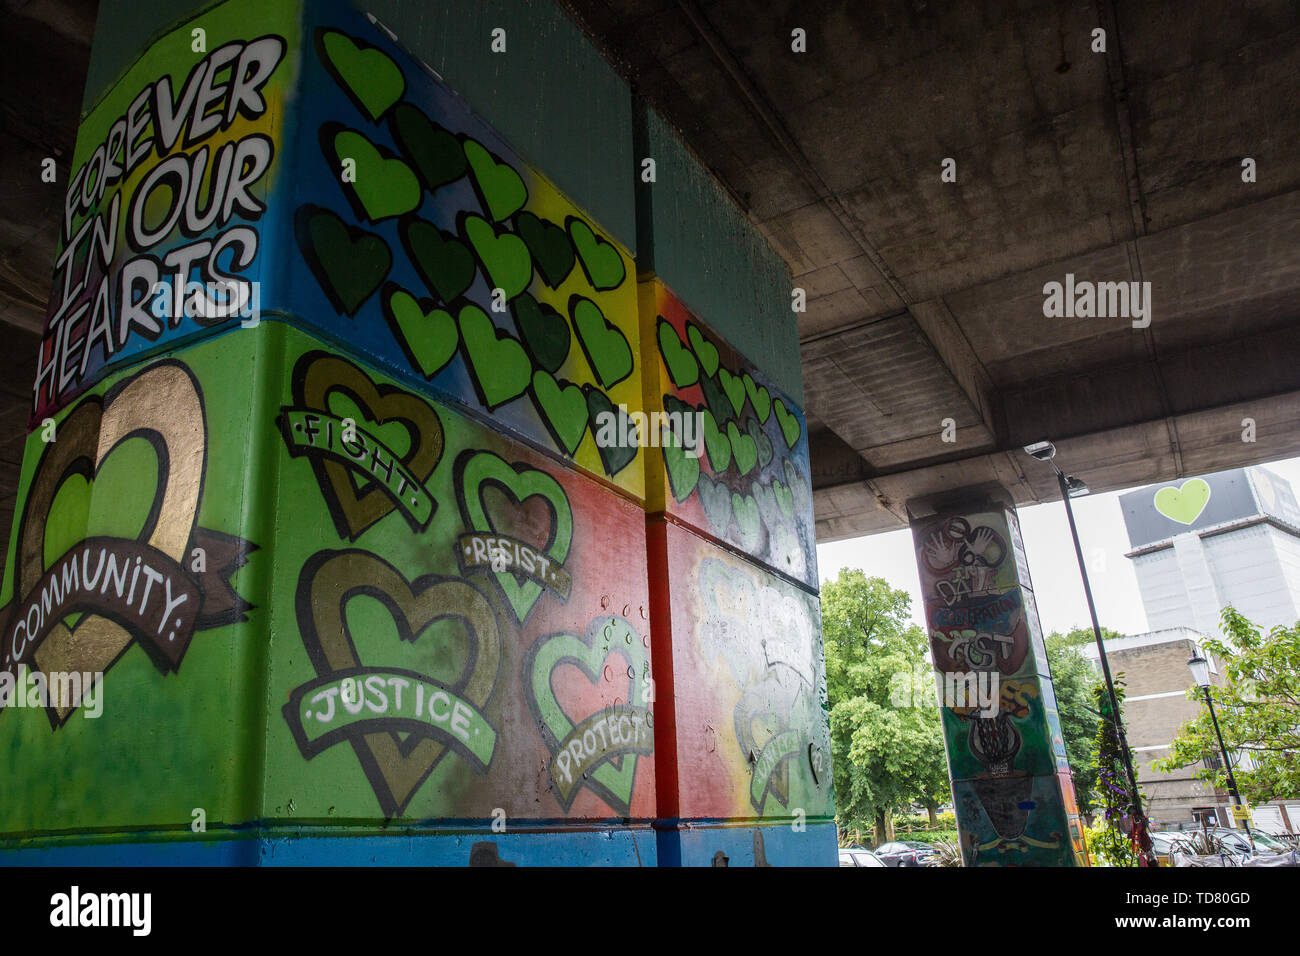 London, UK. 13 June, 2019. Murals underneath the Westway close to the Grenfell Tower in North Kensington. Tomorrow, the Grenfell community will mark the second anniversary of the Grenfell Tower fire on 14th June 2017 in which 72 people died and over 70 were injured. Two years on, some family members remain in temporary accommodation and many are still traumatised. Phase 2 of the Grenfell Inquiry will begin in 2020, with criminal investigation findings expected to be sent to the Crown Prosecution Service in 2021. Credit: Mark Kerrison/Alamy Live News Stock Photo